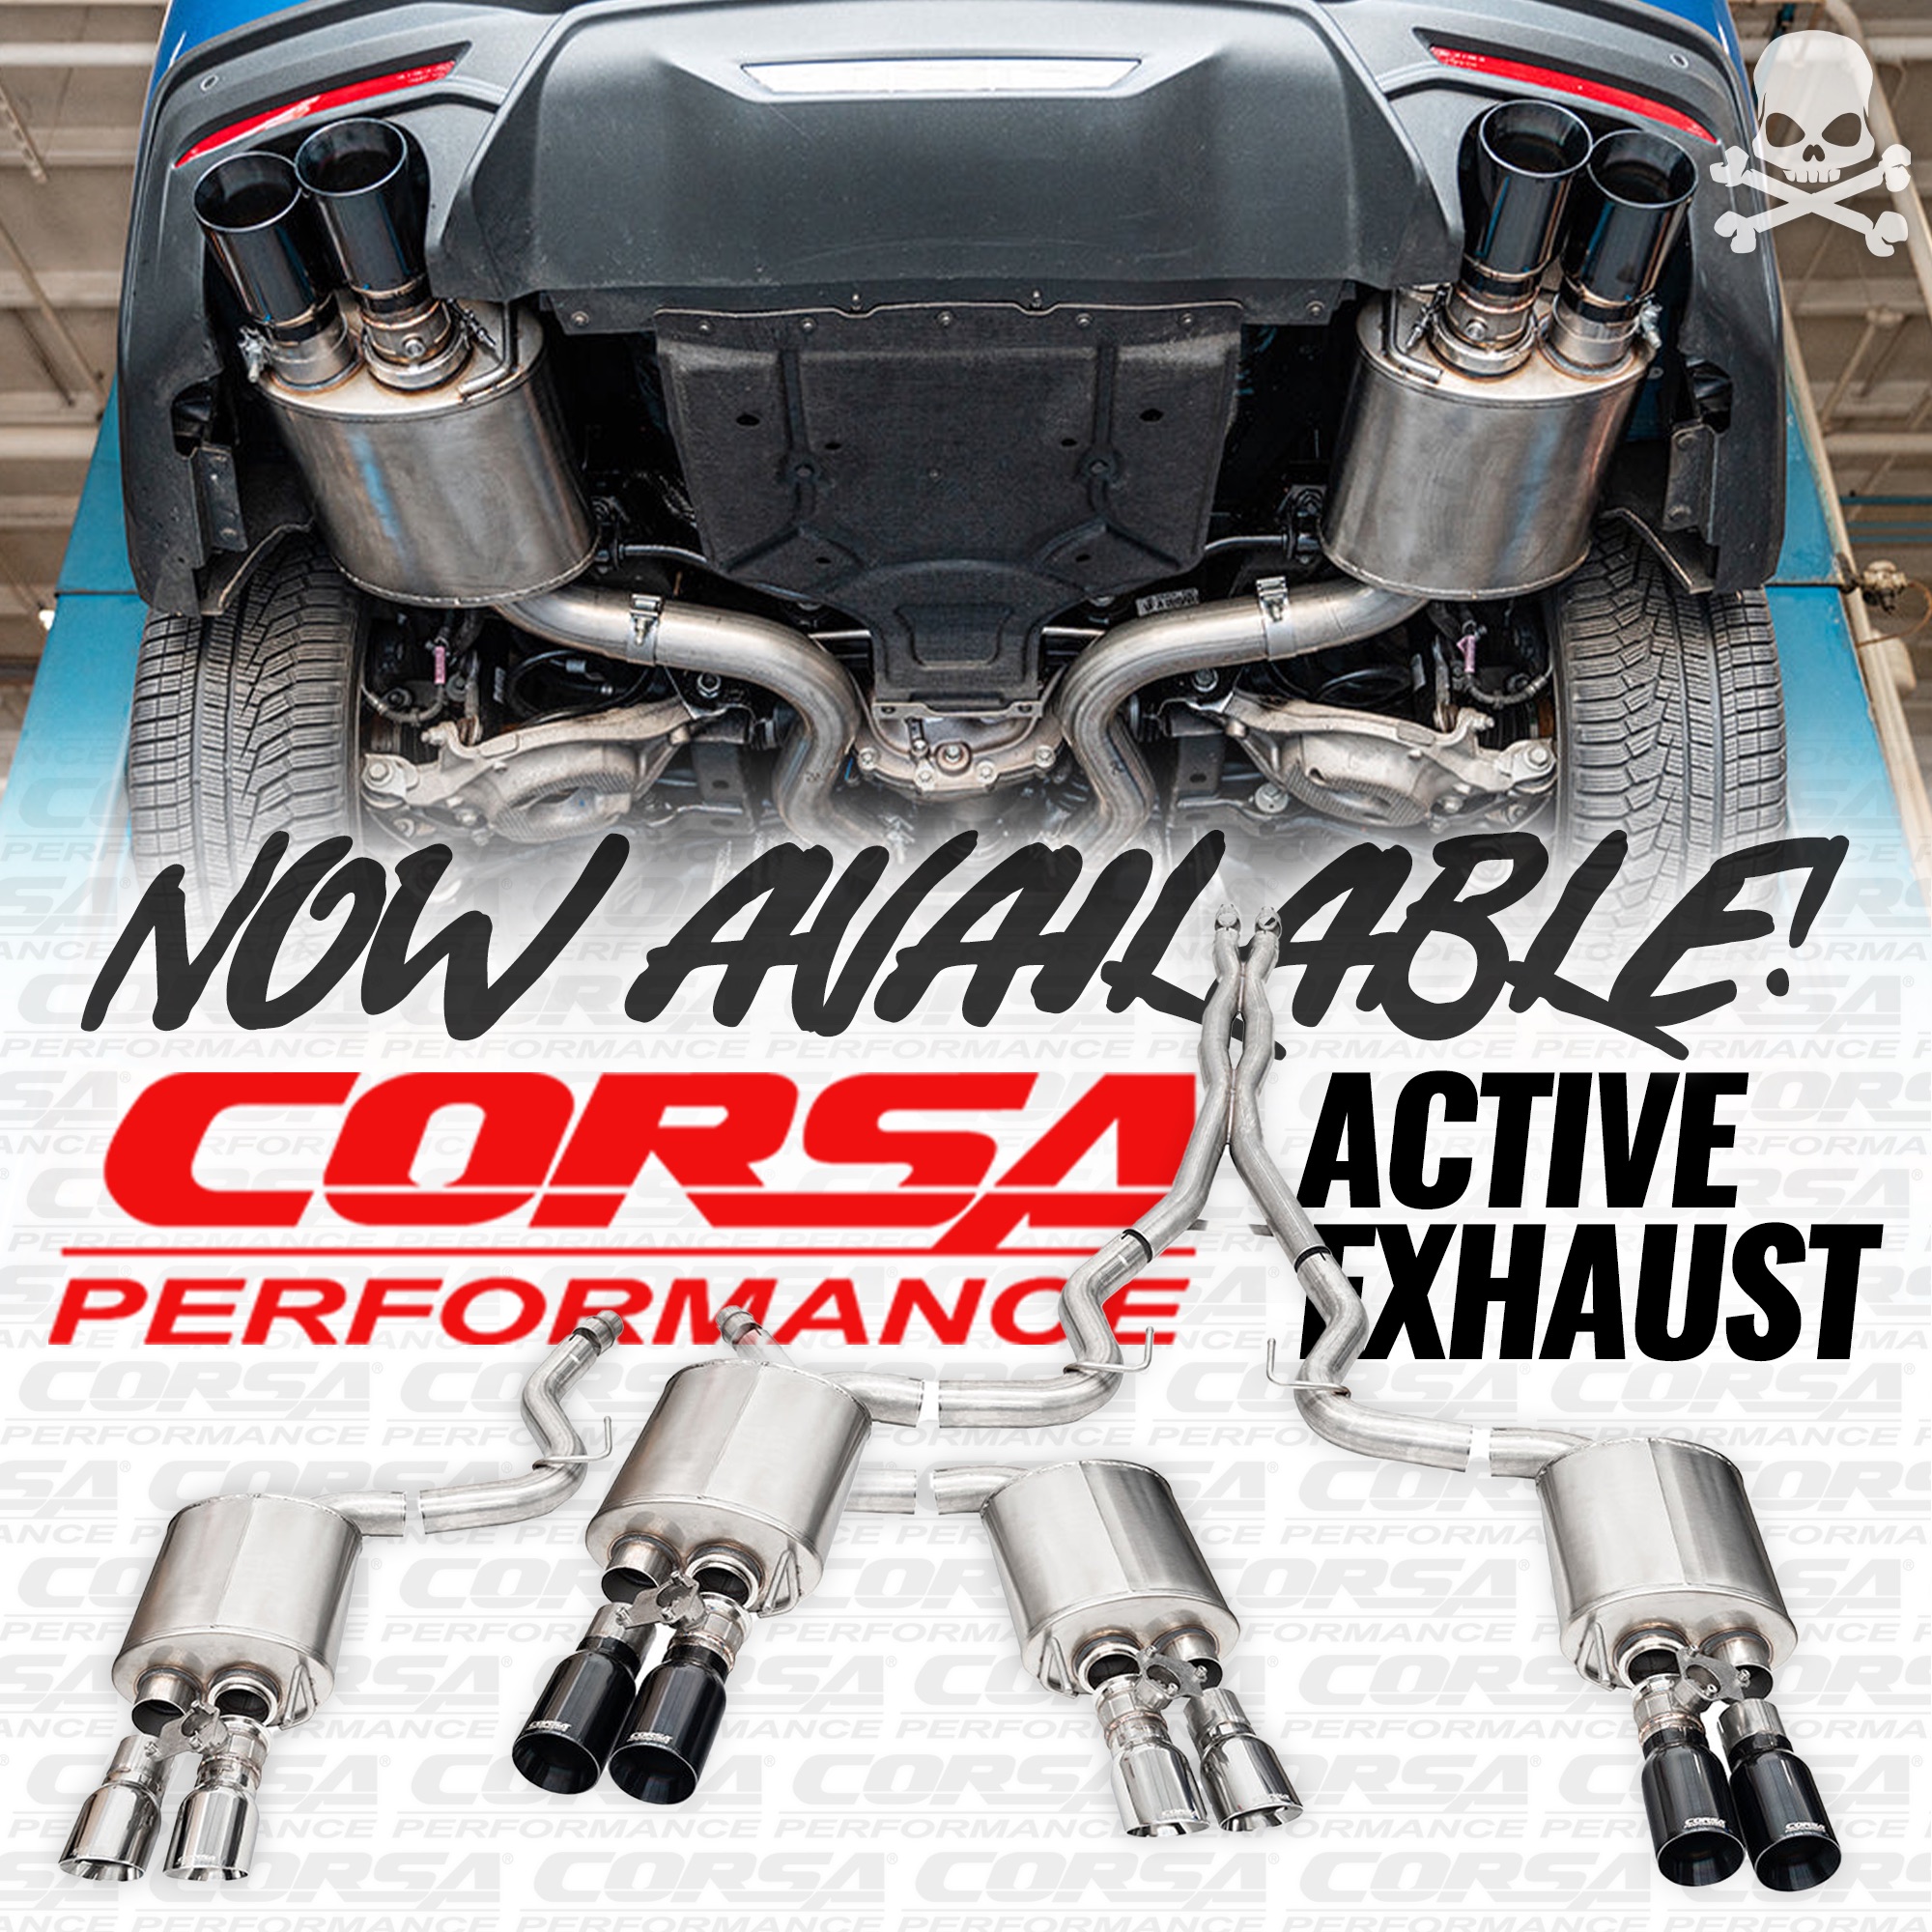 S650 Mustang Corsa Performance Active Exhaust for 2024 Mustang GT! - NOW AVAILABLE! corsa active exhaust sq